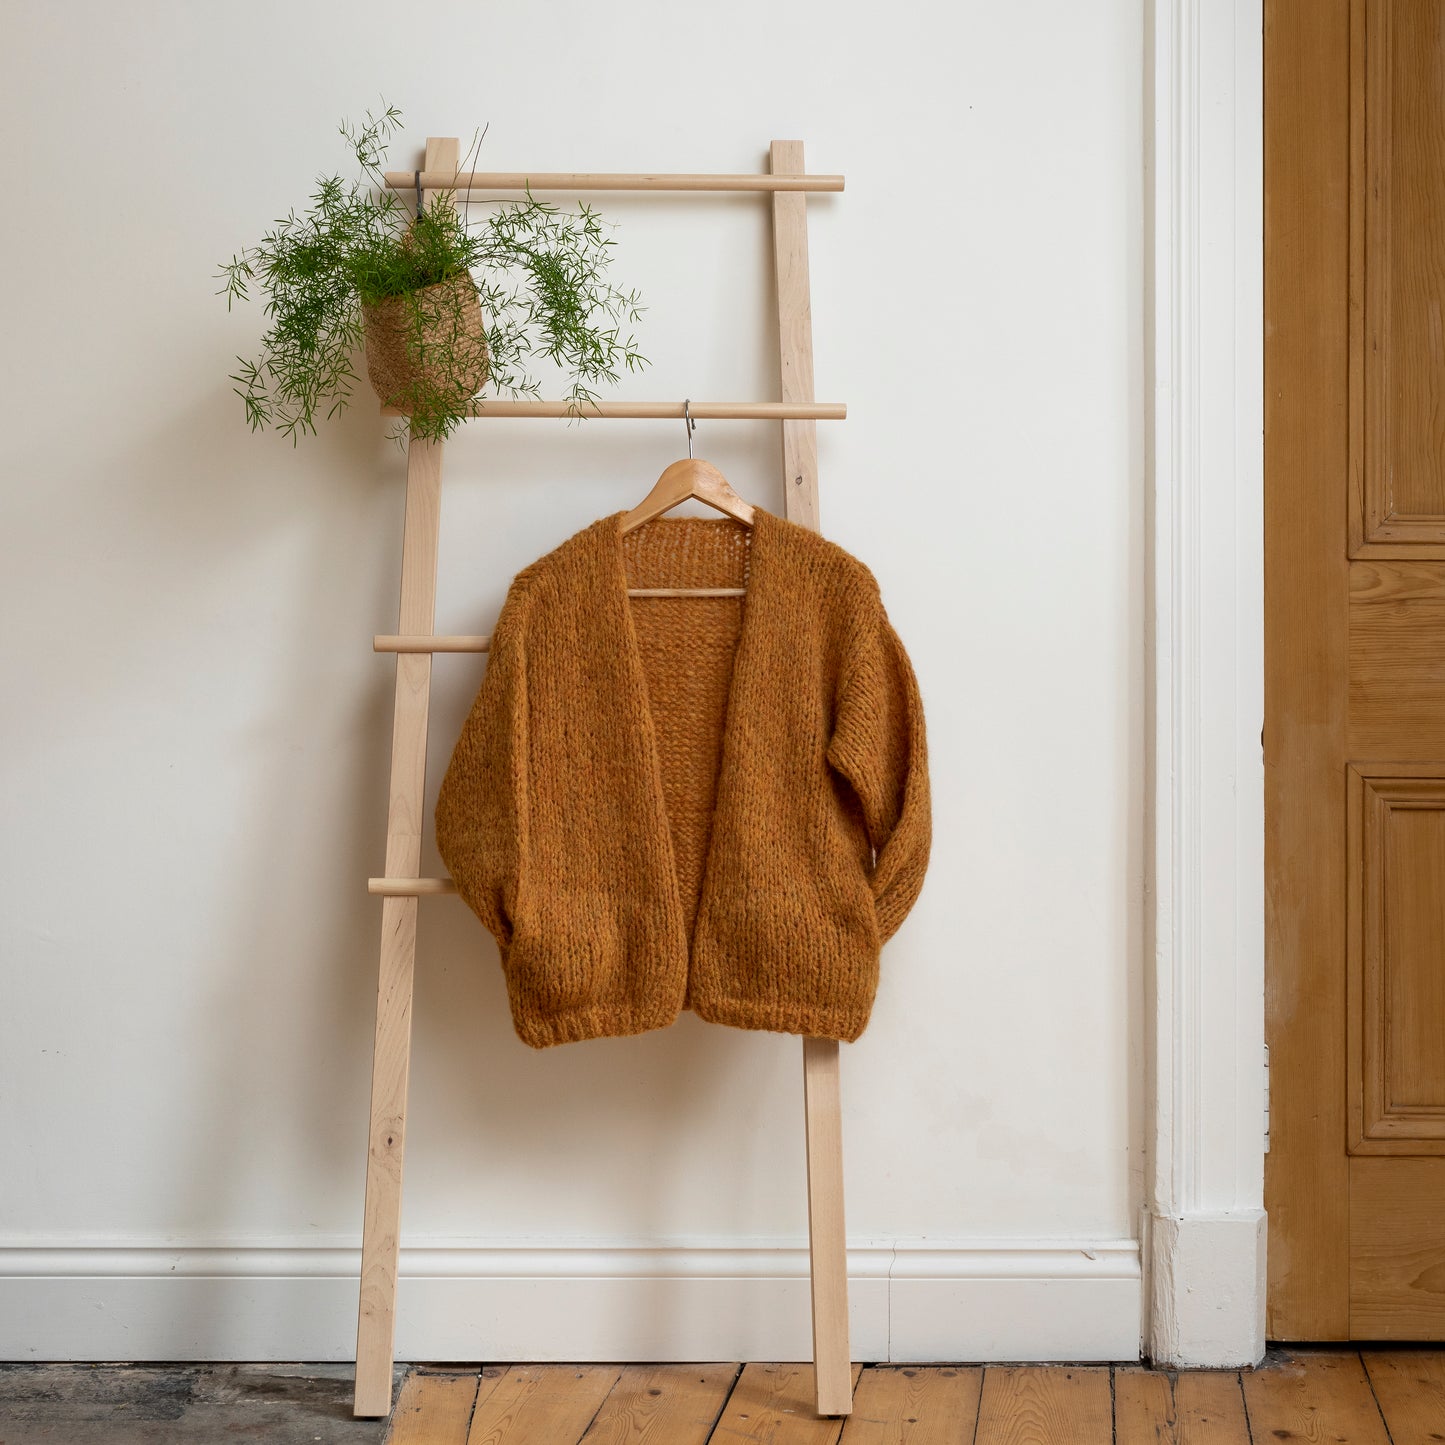 Yellow coloured knitted alpaca wool cardigan hanging on wooden steps. Beautiful one-of-a-kind item.